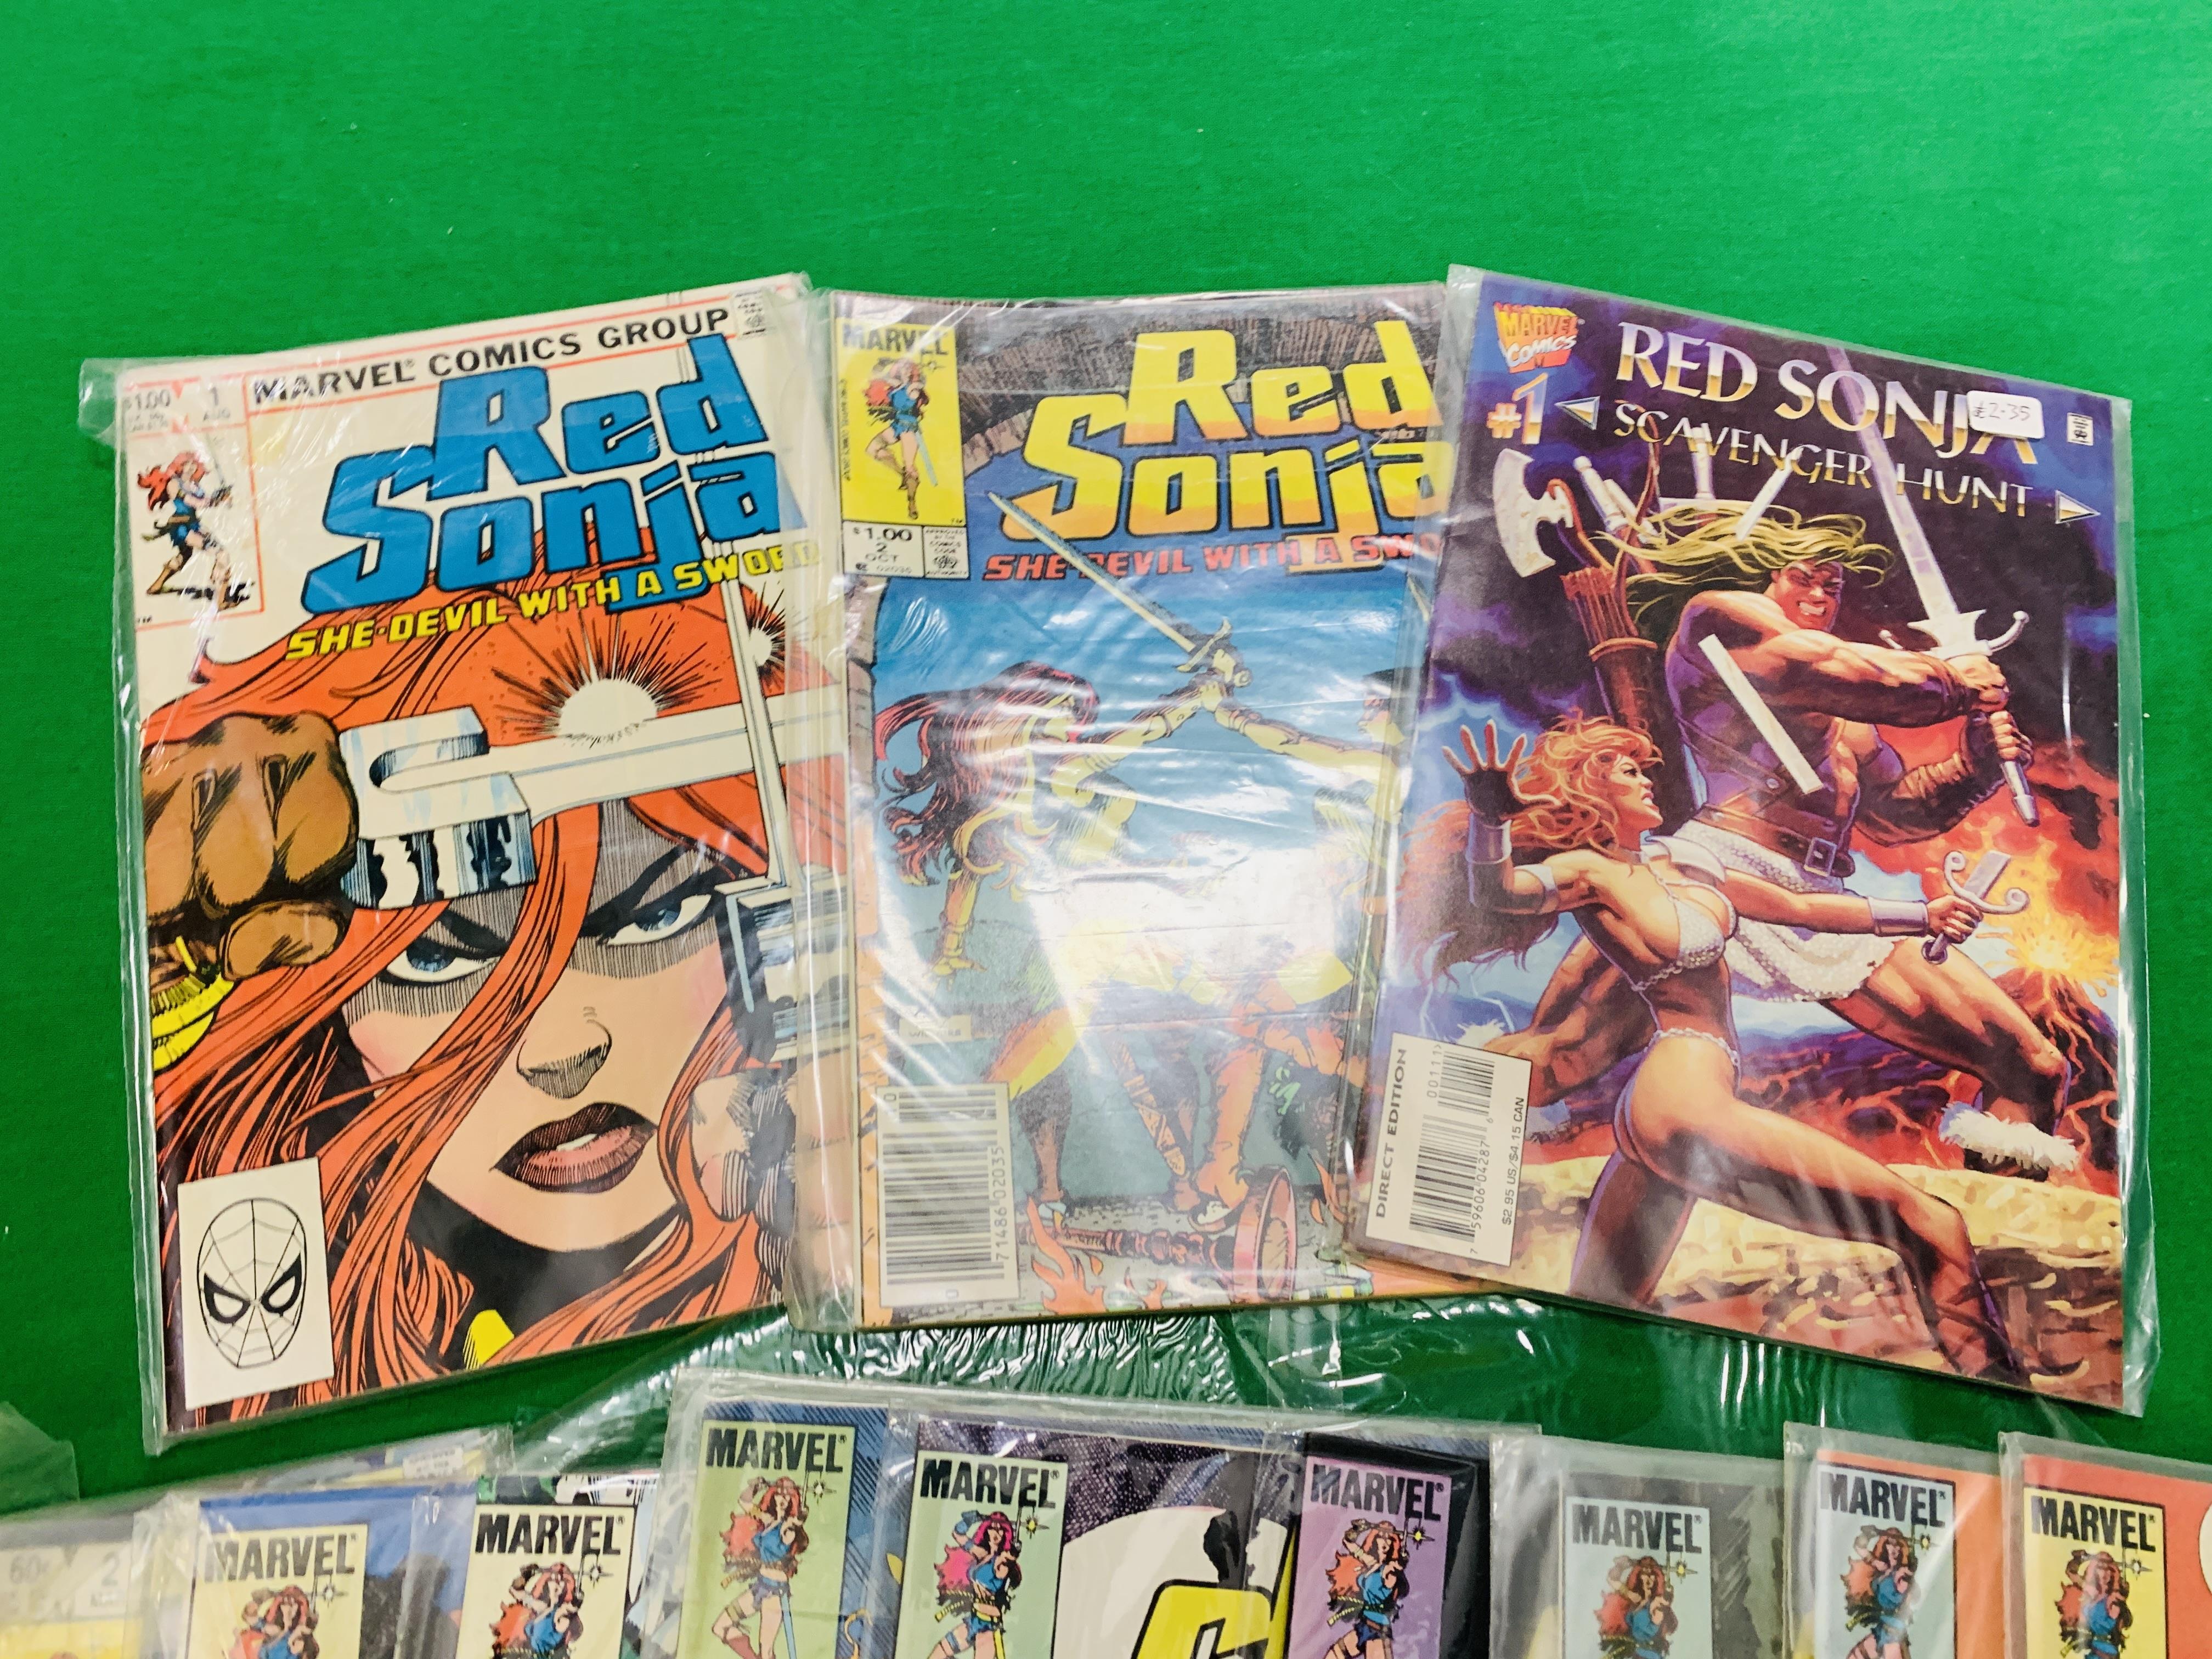 MARVEL COMICS RED SONJA NO. 1 - 15 FROM 1977 AND NO. 1 - 13 FROM 1983, INCLUDING OTHER APPEARANCES. - Image 8 of 8